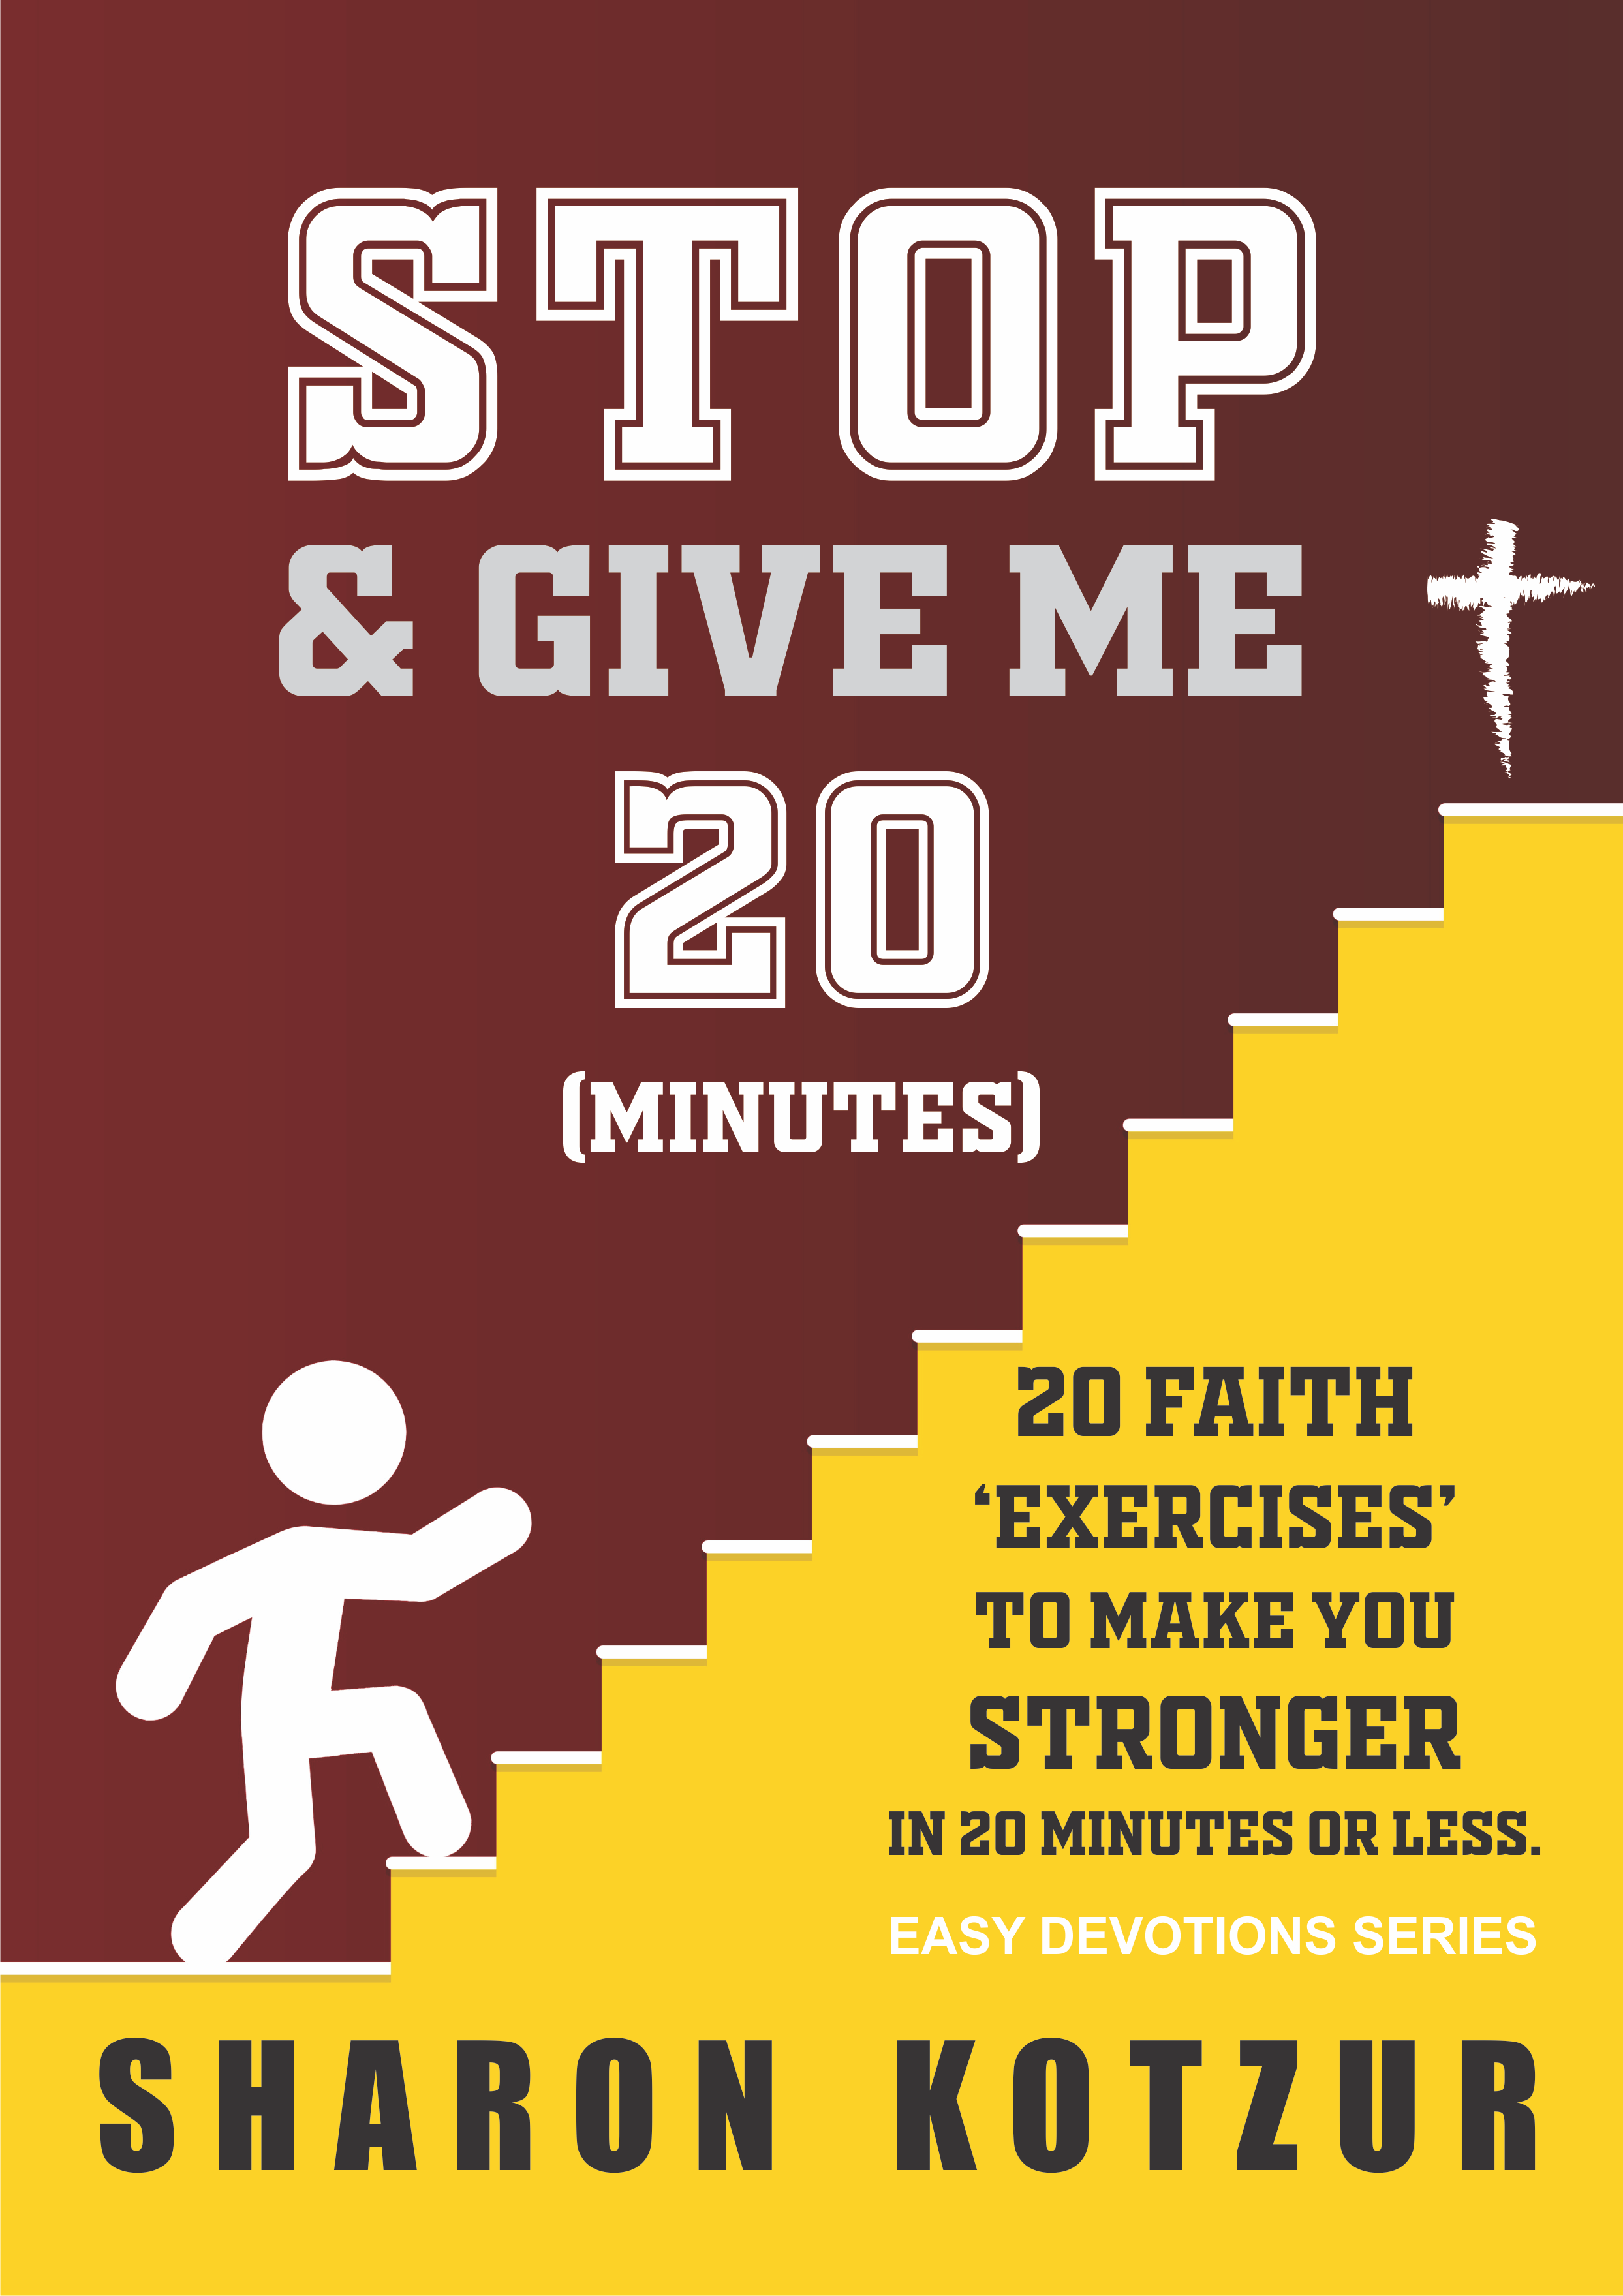 FREE: Stop And Give Me 20 Minutes: 20 Faith Exercises to Make You Stronger in 20 Minutes or Less by Sharon Kotzur